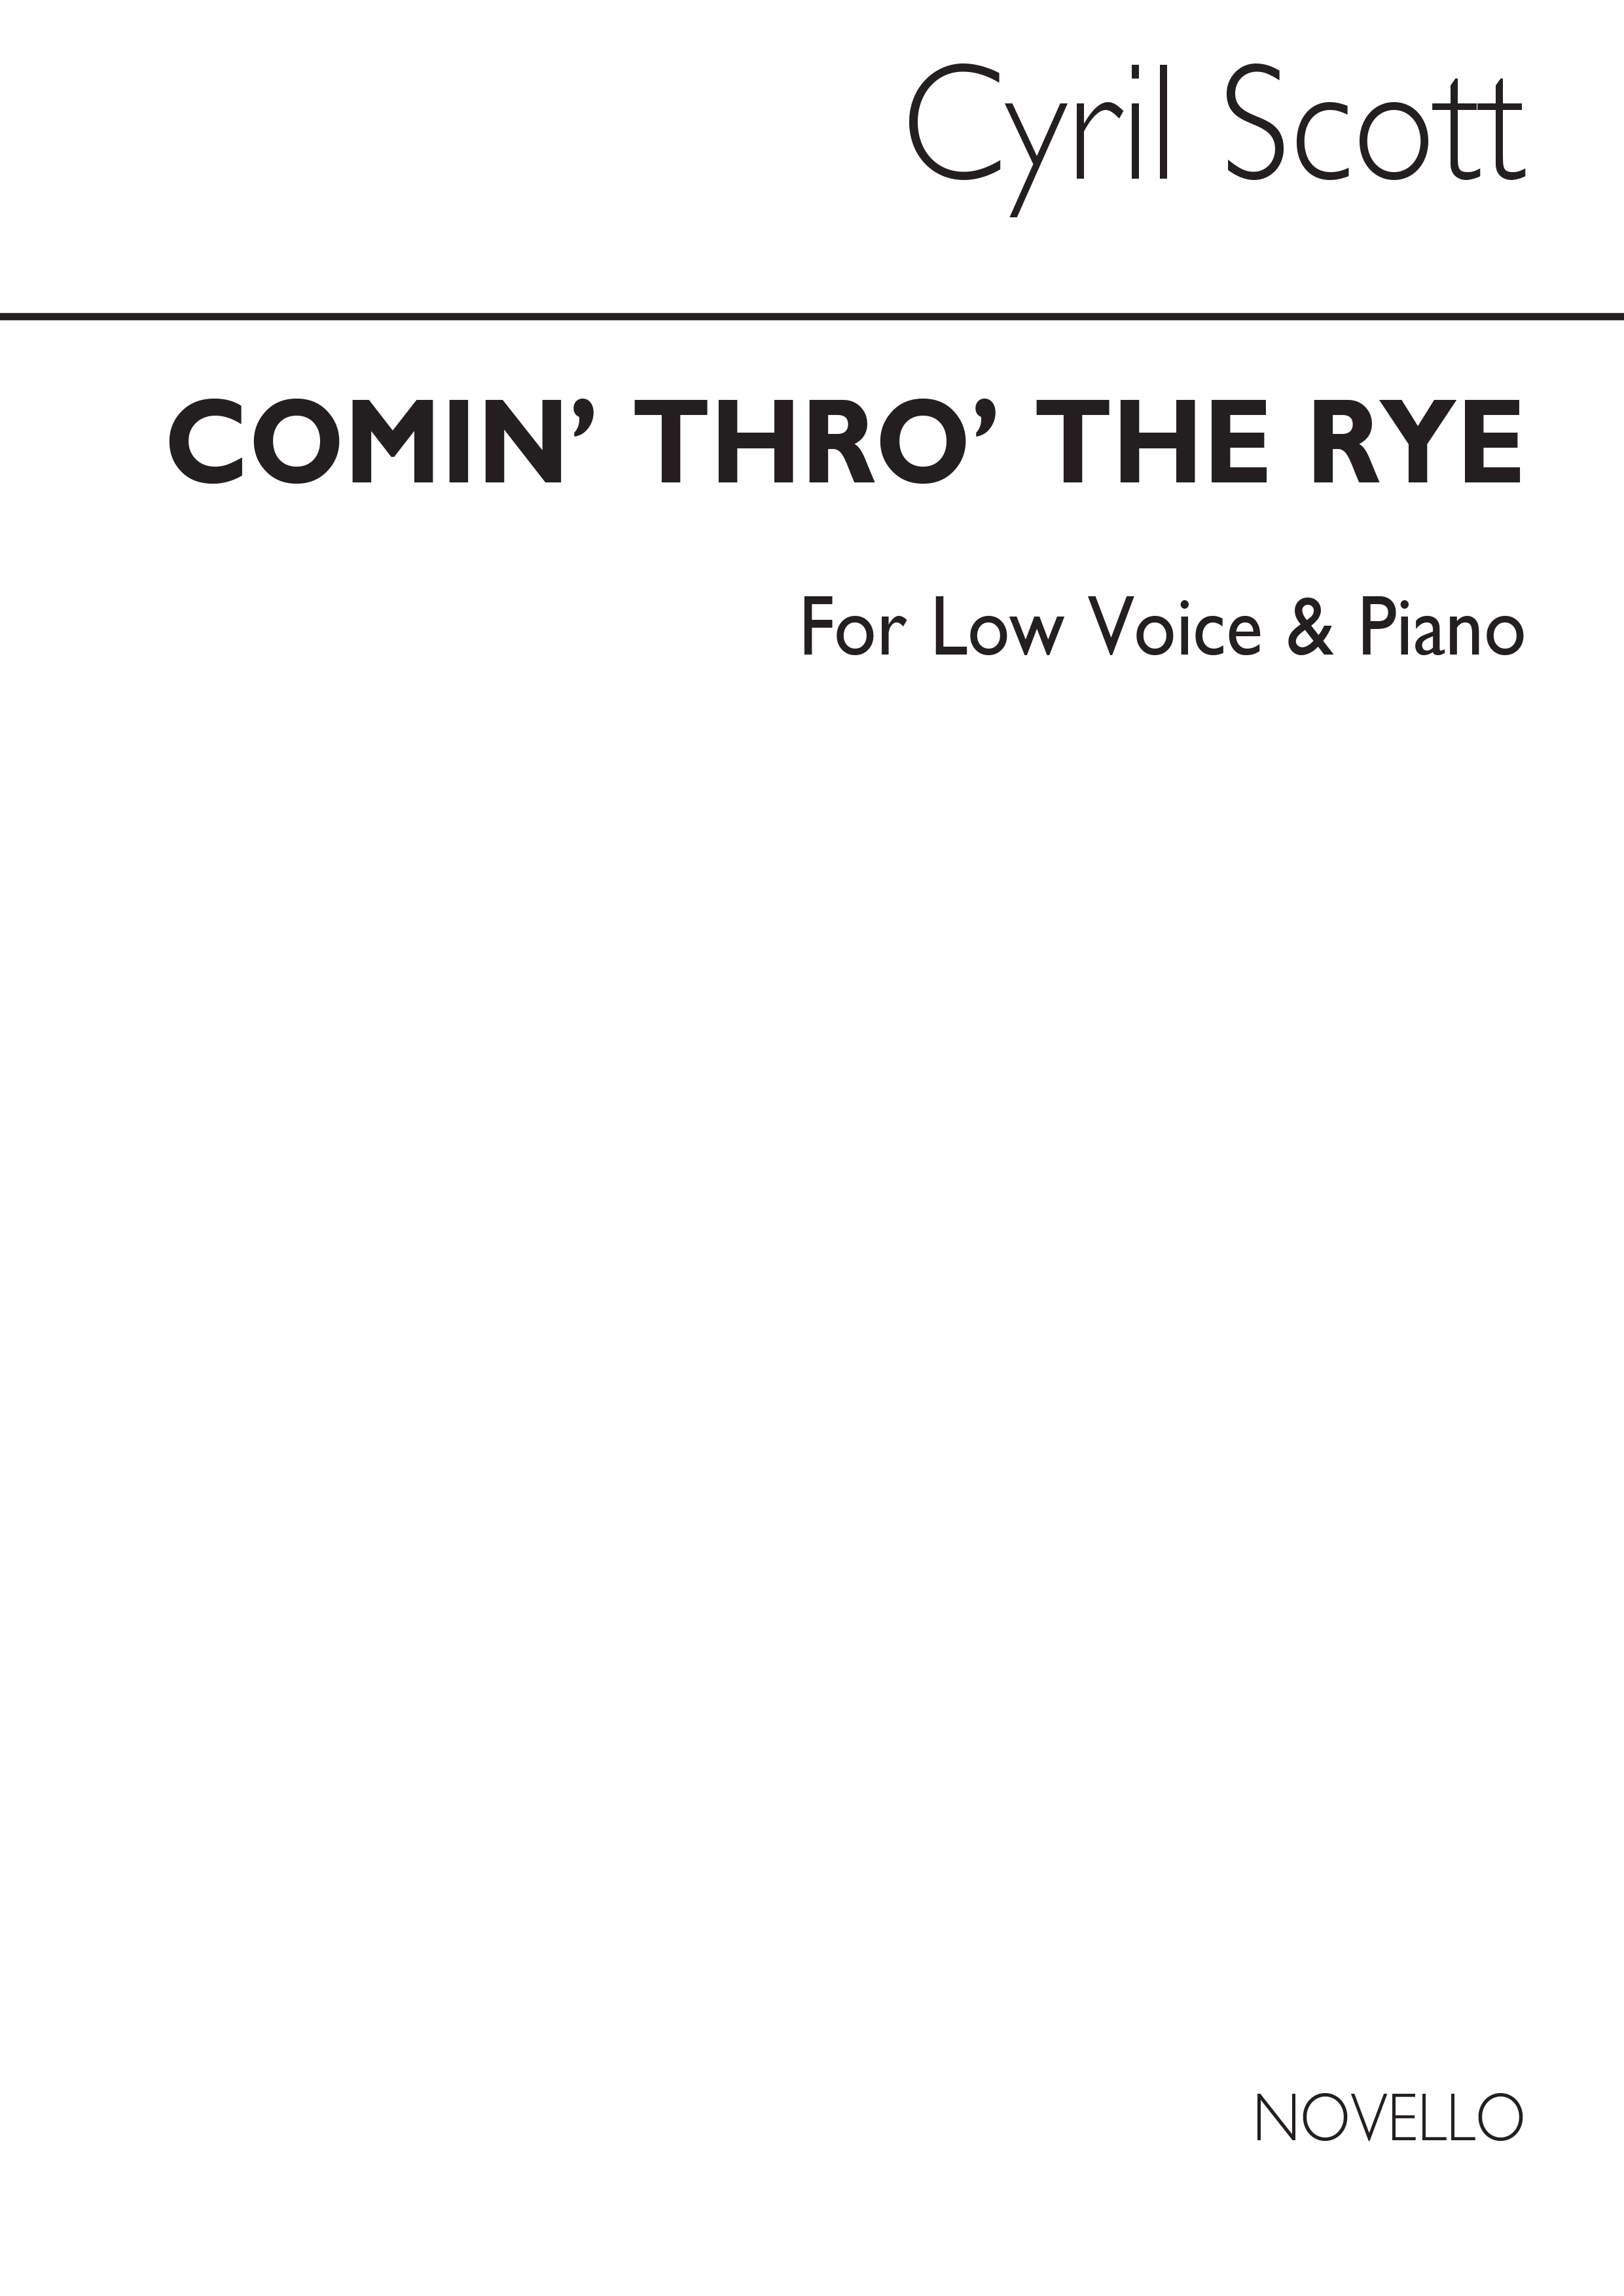 Cyril Scott: Comin' Thro' The Rye-low Voice/Piano (Key-g)